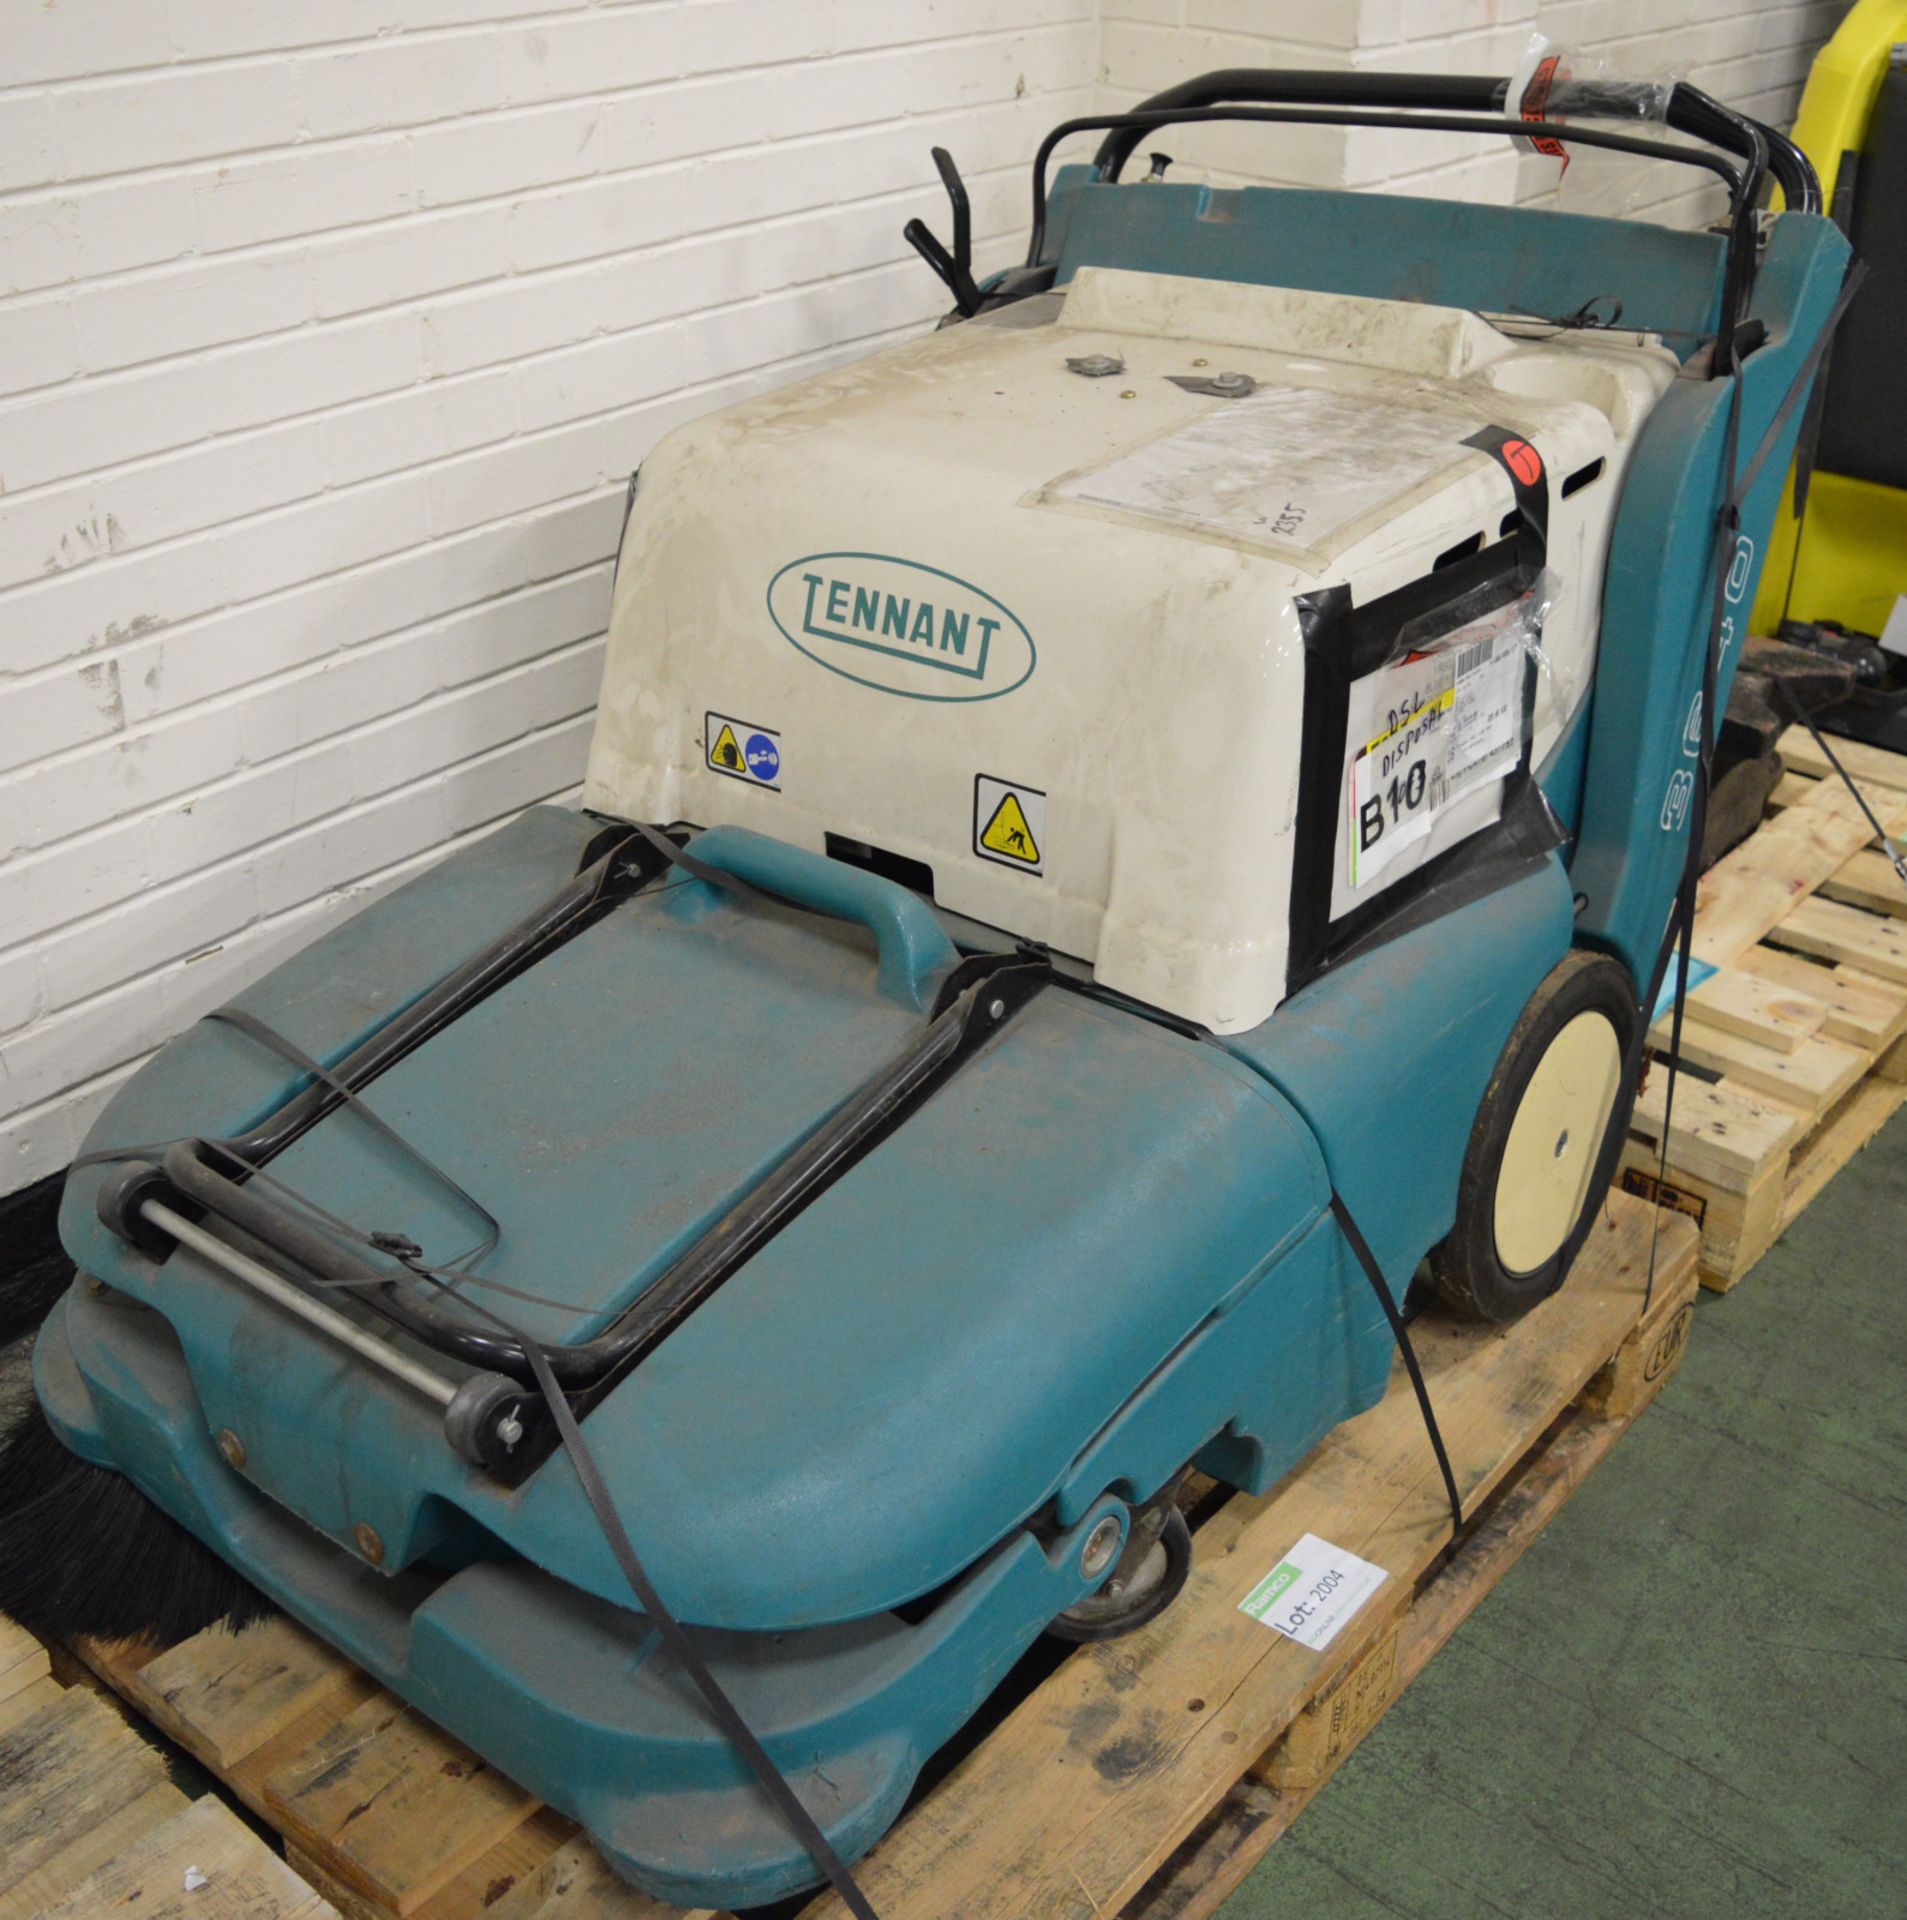 Tennant Floor Sweeping Machine 3640 - Requires attention. - Image 2 of 2